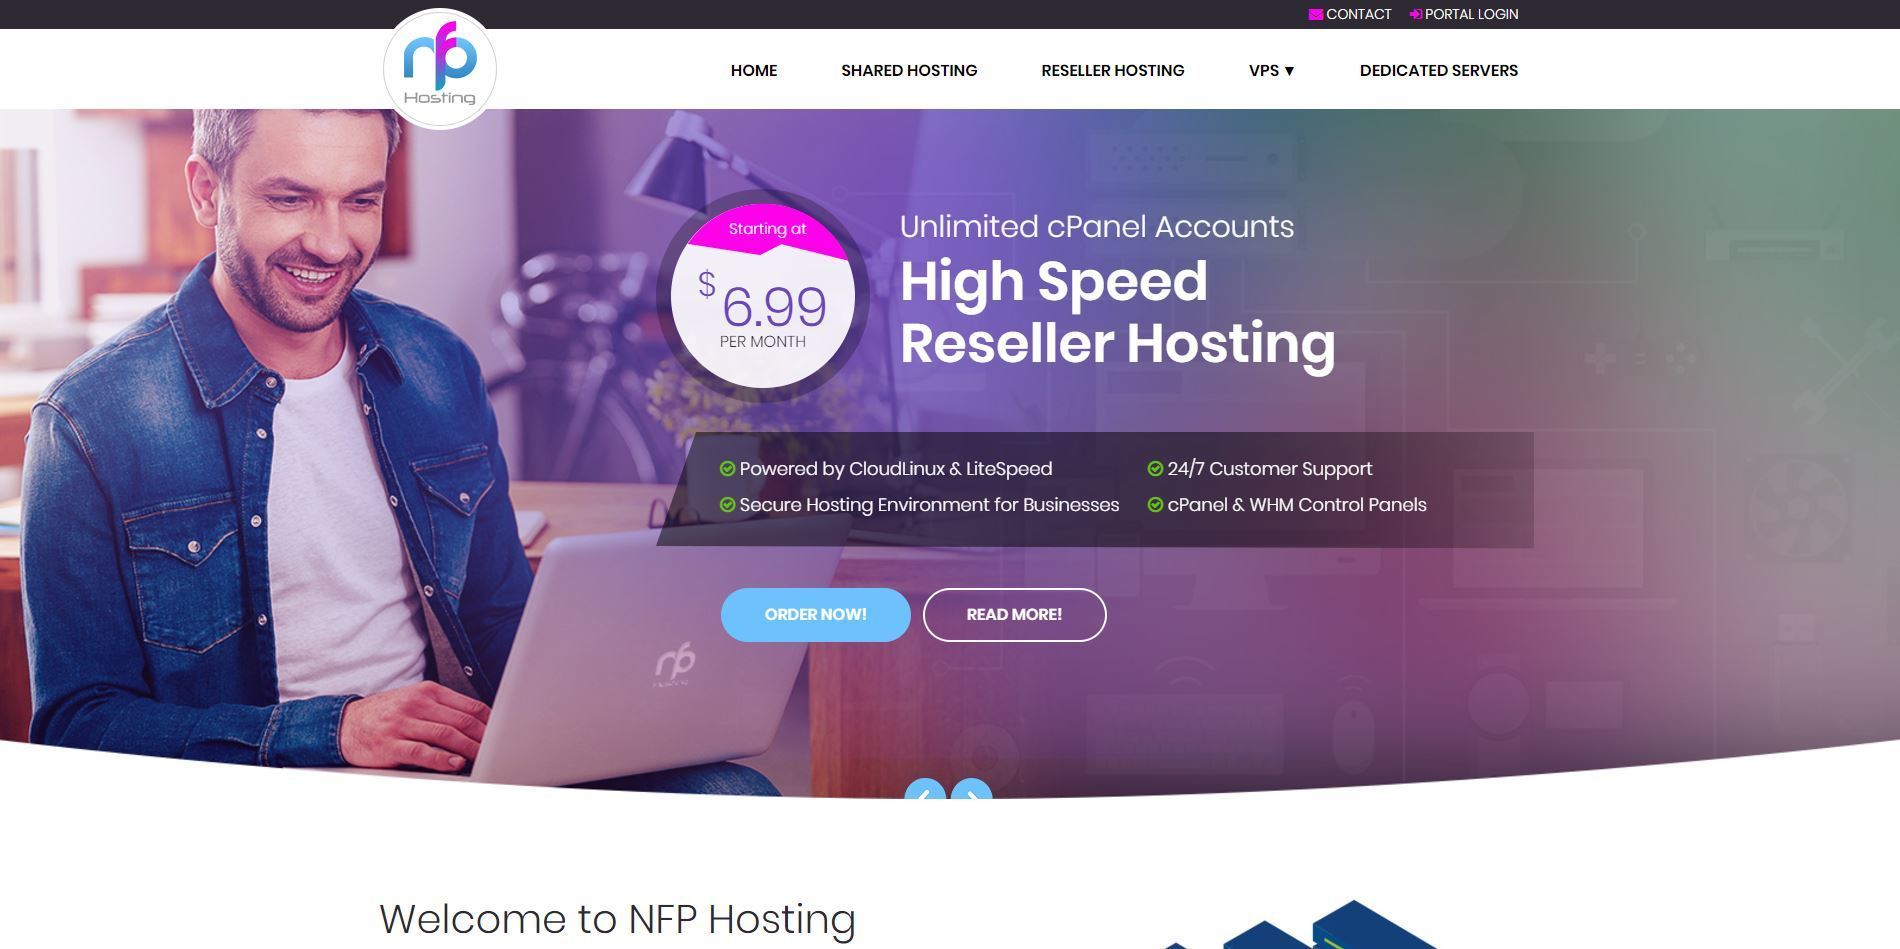 NFPHosting - VPS Resource Pools starting at 2 VPS @ $15/yr & much more in LA, NY, and CHI!